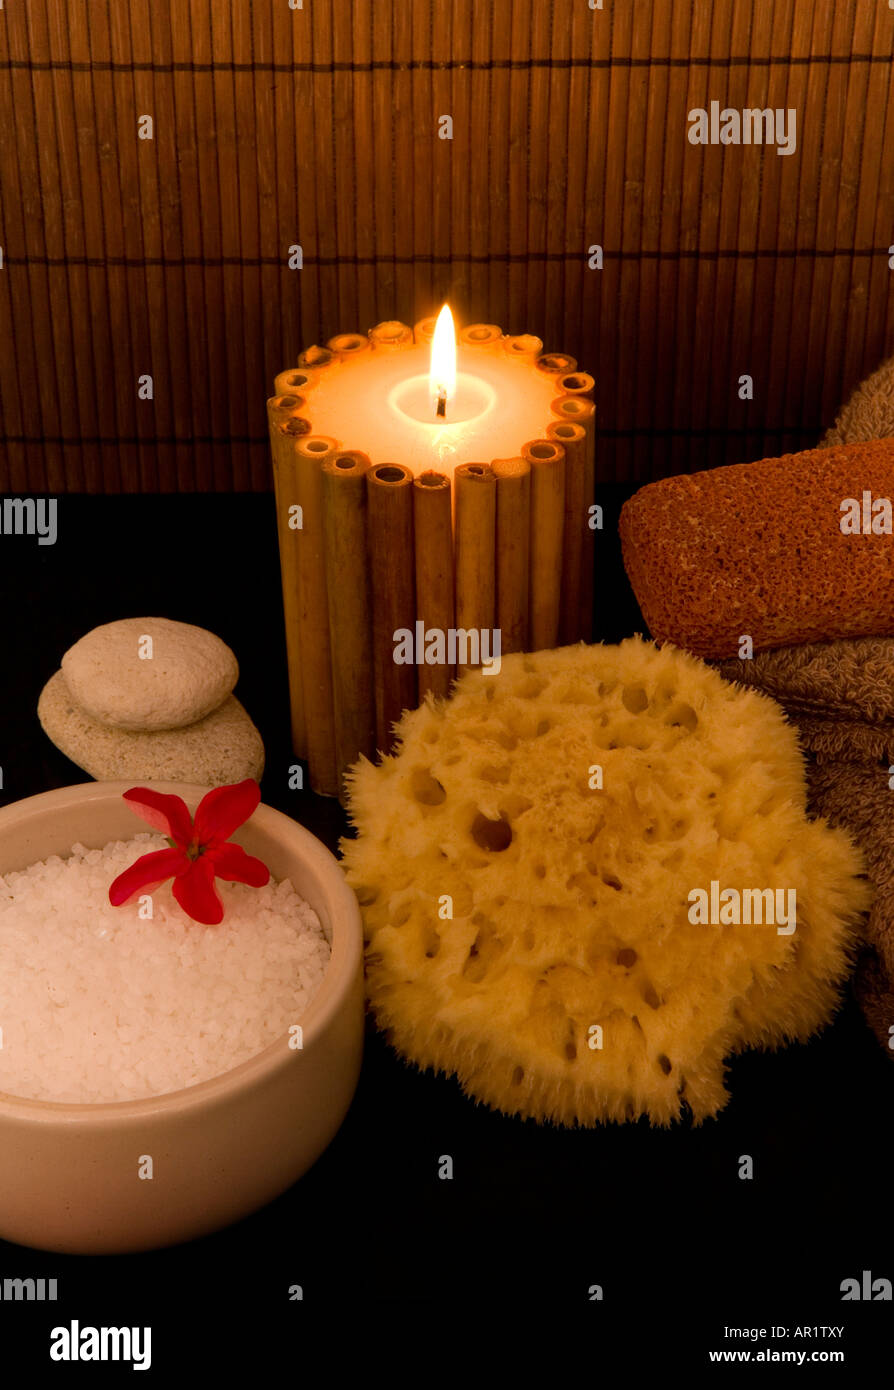 Spa setting with aromatic candles, sea salts, a natural sponge, body scrubs and folded towels. Stock Photo